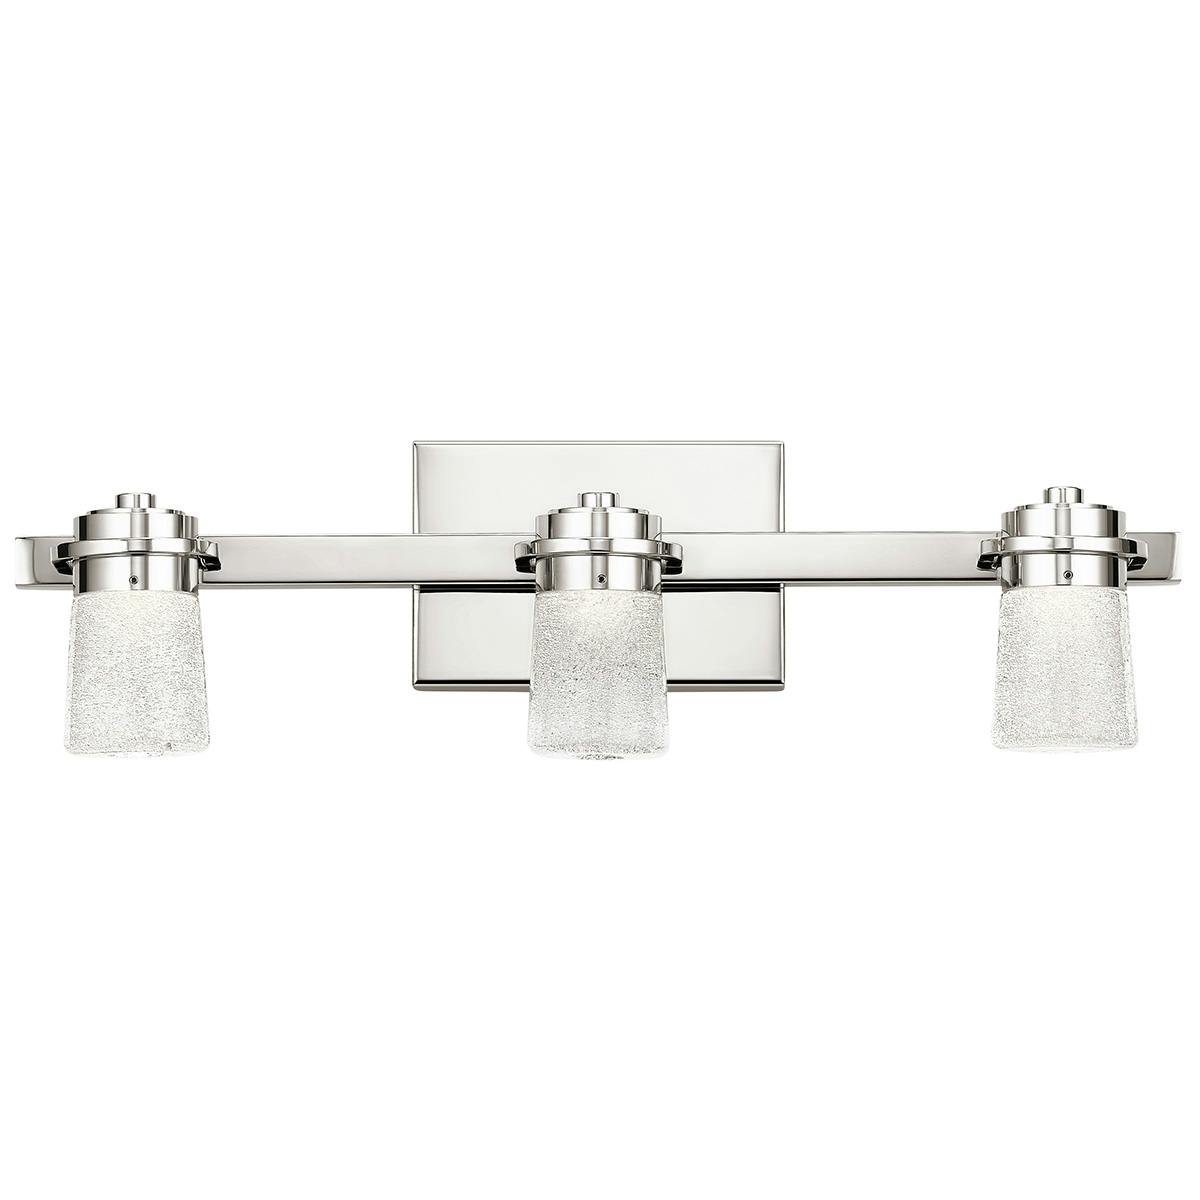 Front view of the Vada 3000K 3 Light Vanity Light Nickel on a white background